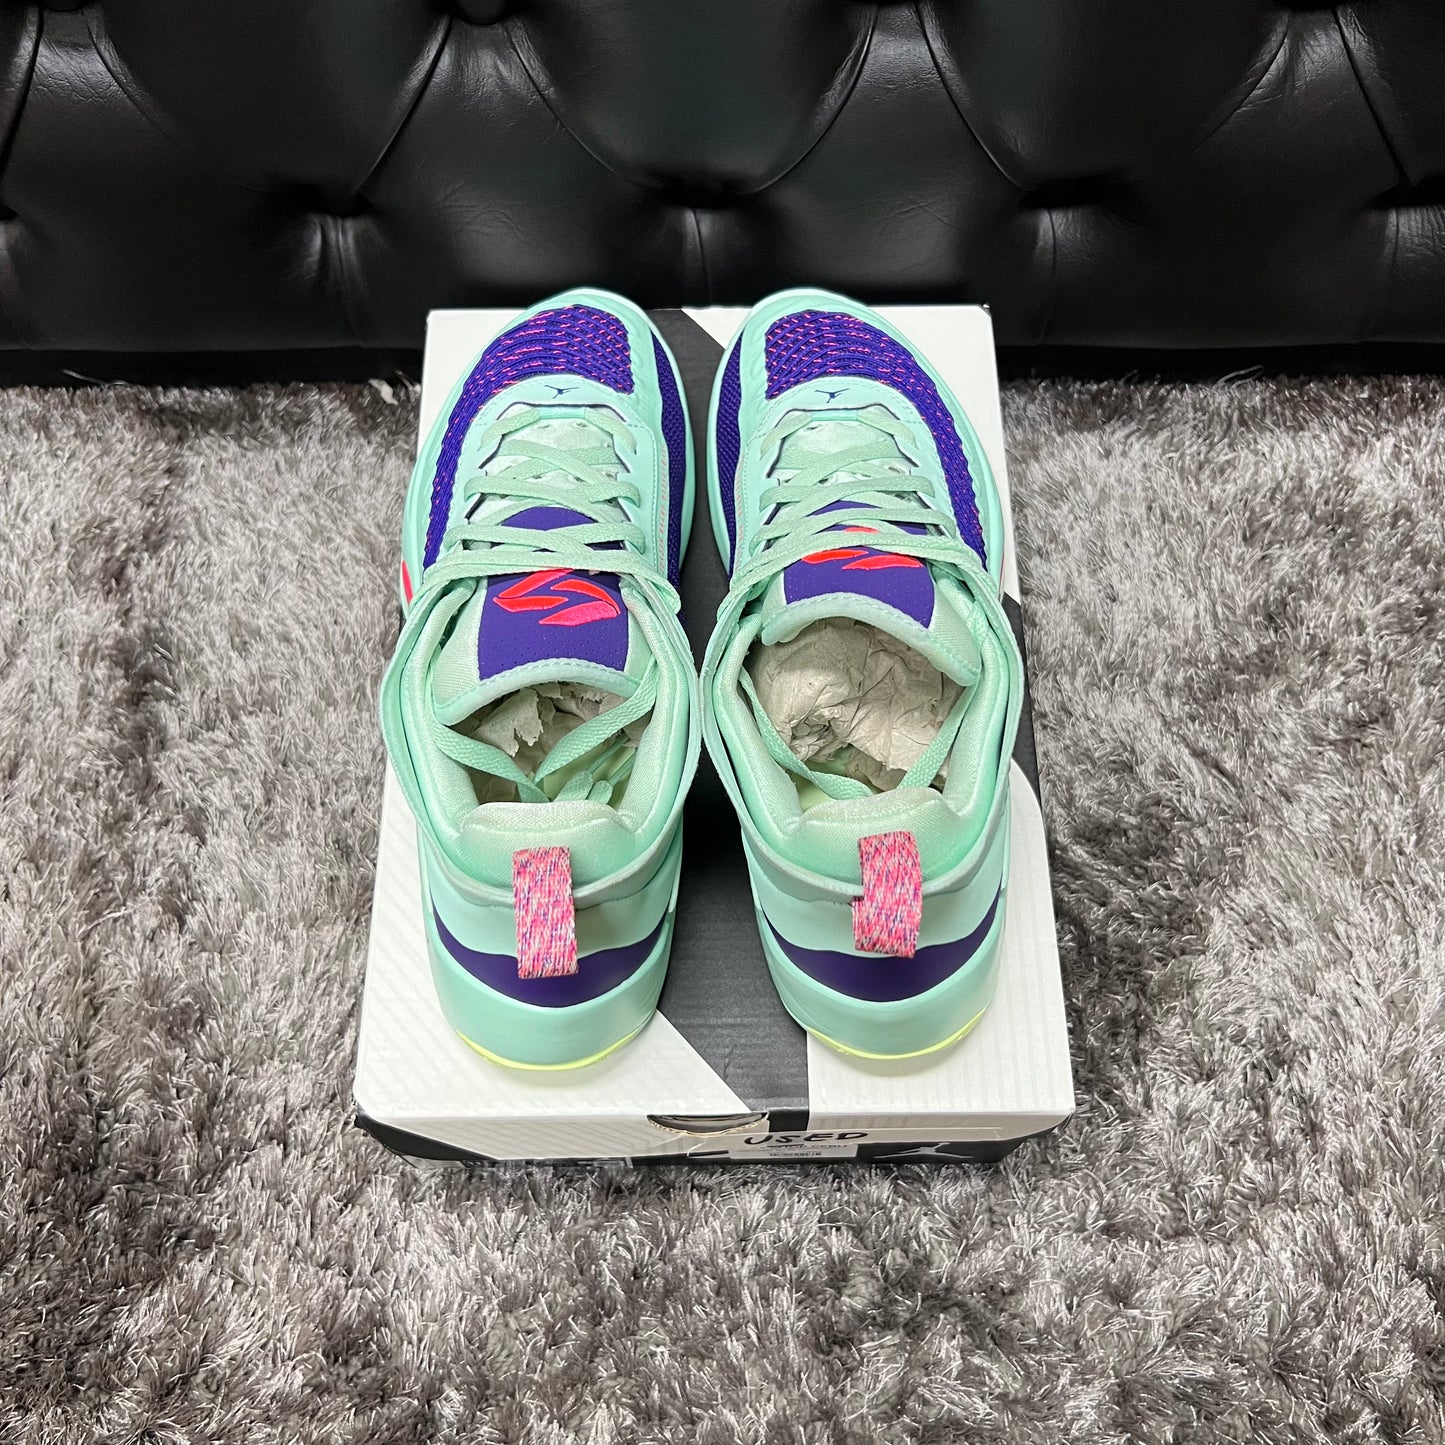 Luka 1 Easter size 9.5 used